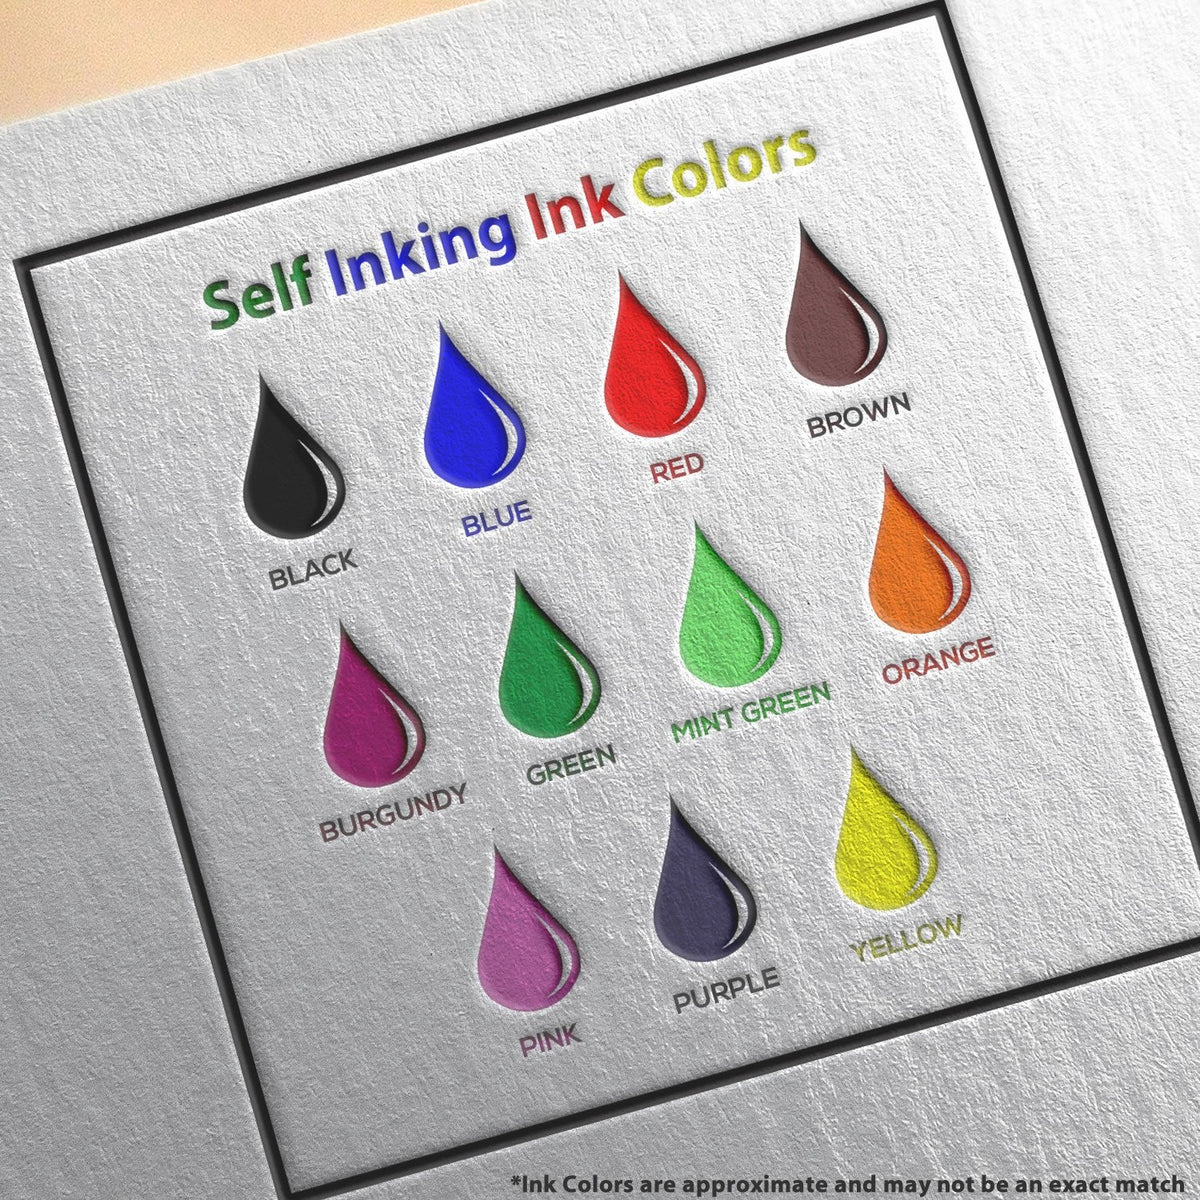 Self-Inking Paid with Box Stamp Ink Color Options